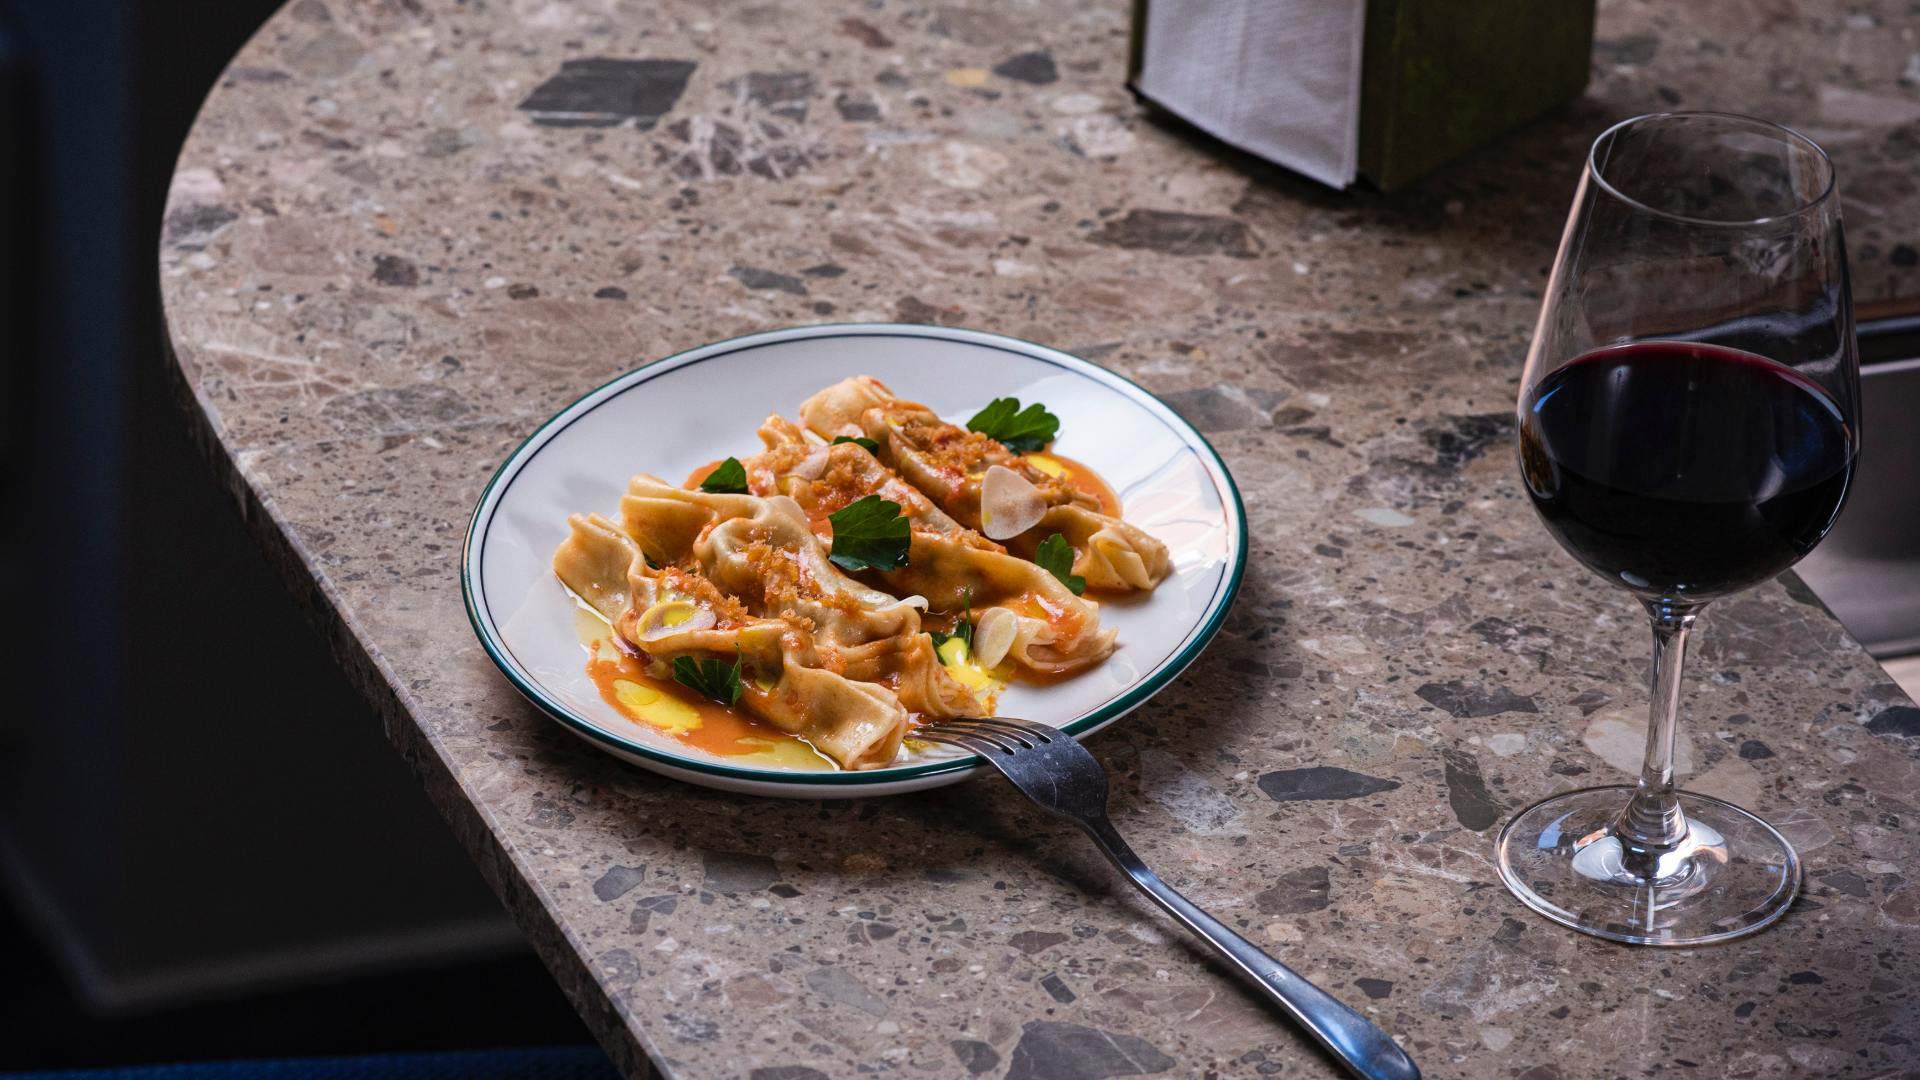 The Hardware Club Is Melbourne's New Laneway Italian Restaurant in a 100-Year-Old Social Club